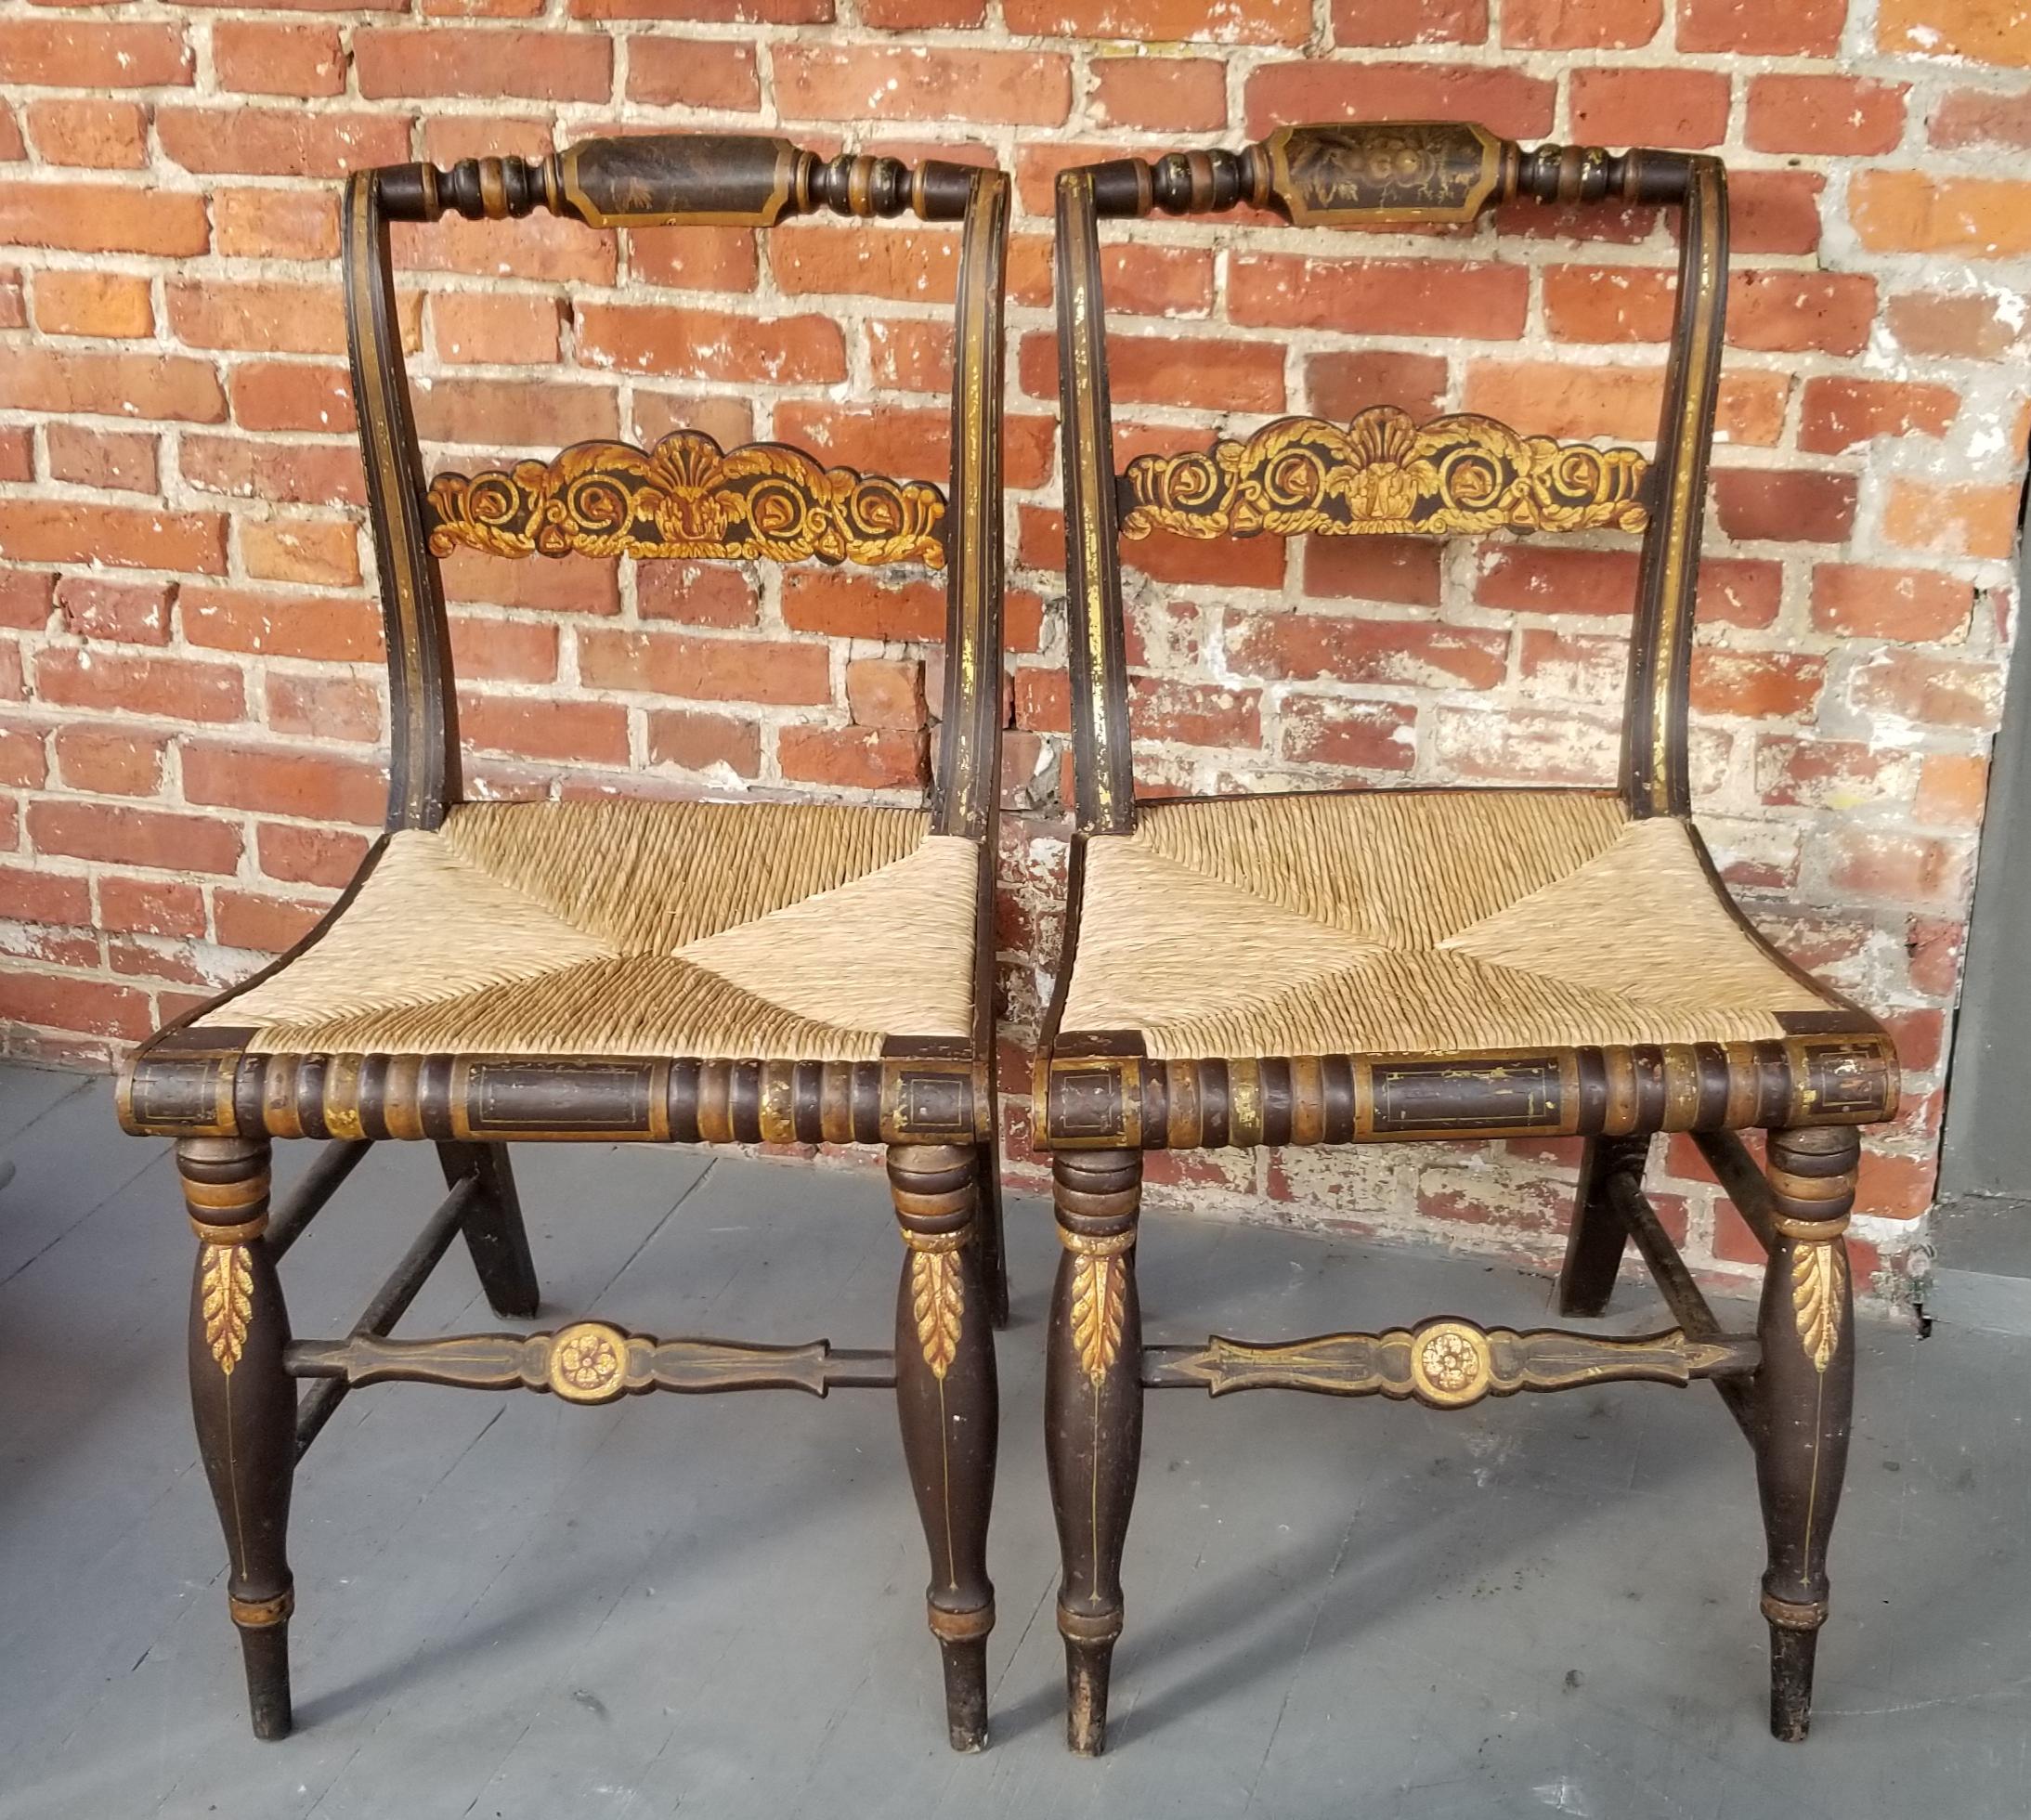 Pair of antique Hitchcock School side chairs featuring gilt stenciled decoration throughout and to include having newer rush seats, circa 1830. Very bold turning, the gold work on the splat and crest rail is lovely.
Very similar pair in the Henry